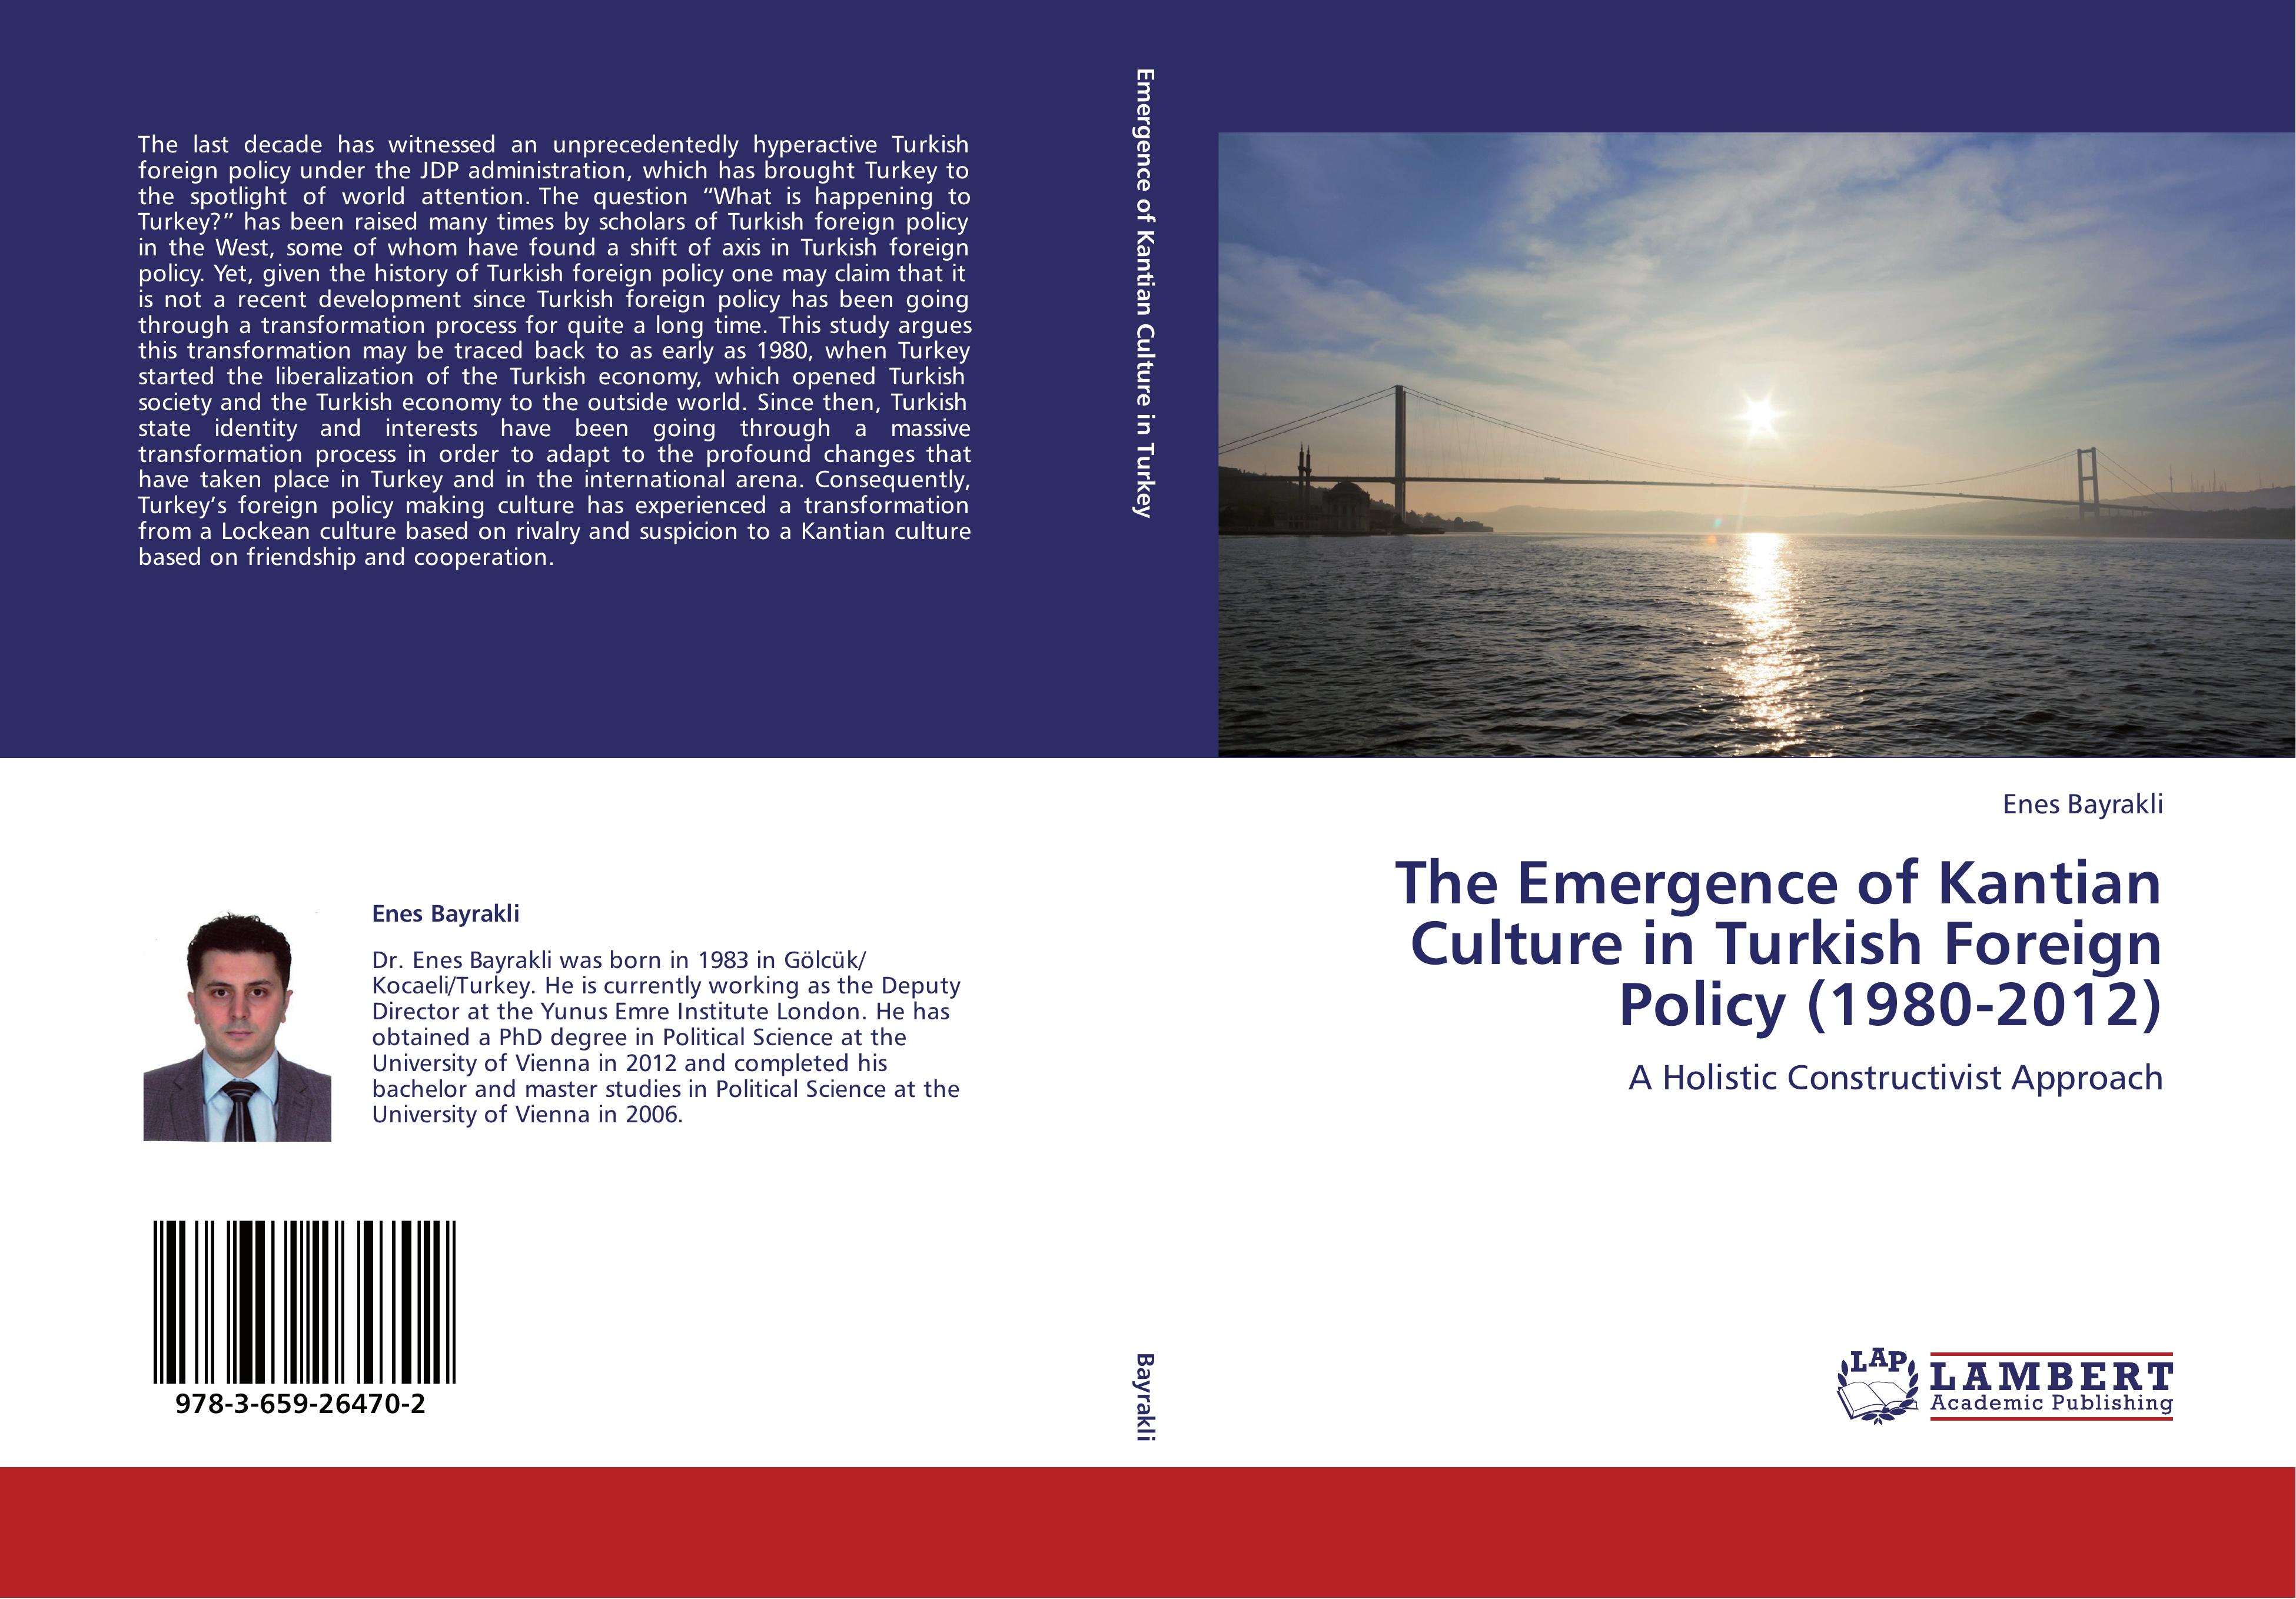 The Emergence of Kantian Culture in Turkish Foreign Policy (1980-2012) - Enes Bayrakli